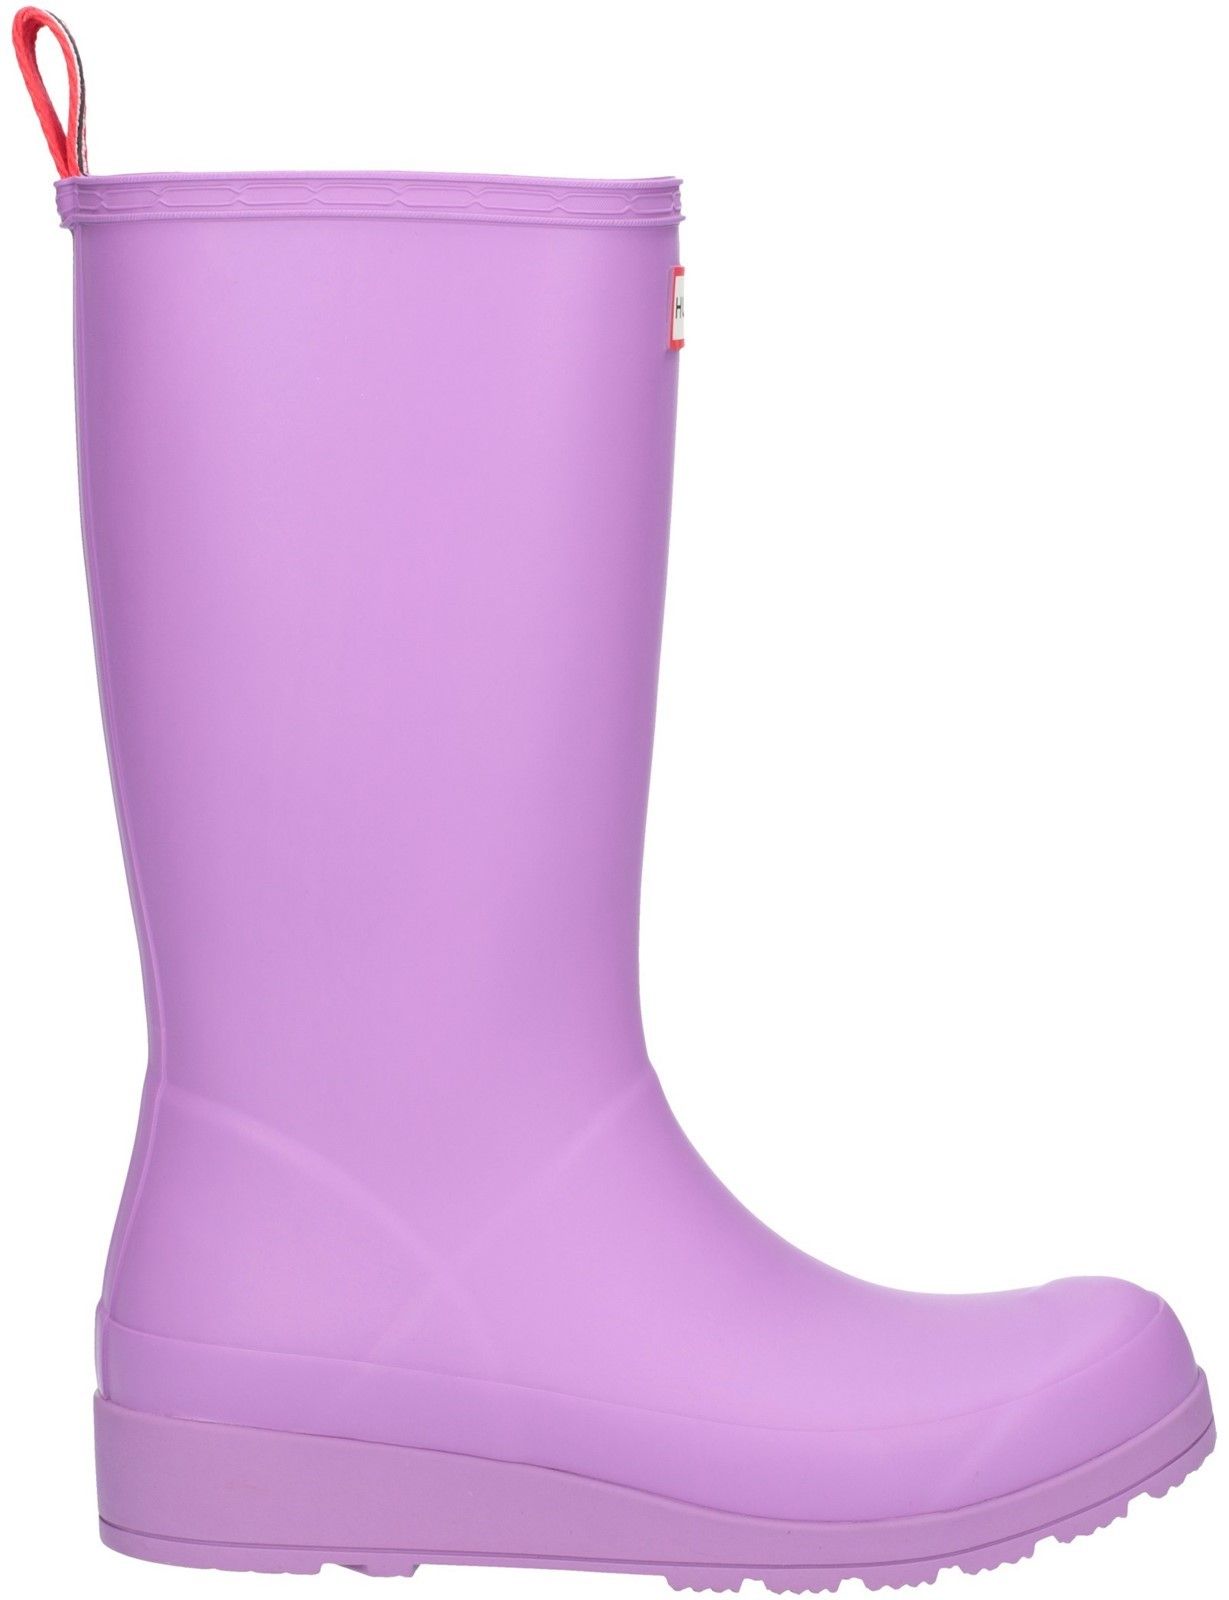 A new, versatile, lightweight, colourful and fully waterproof rain boot. Handcrafted from 10 individual parts, this new boot is a simplification of the Hunter Original design, retaining the most iconic elements of the classic Original Tall Boot. Features a pull tab at the heel for ease of foot entry. Perfect for festivals.